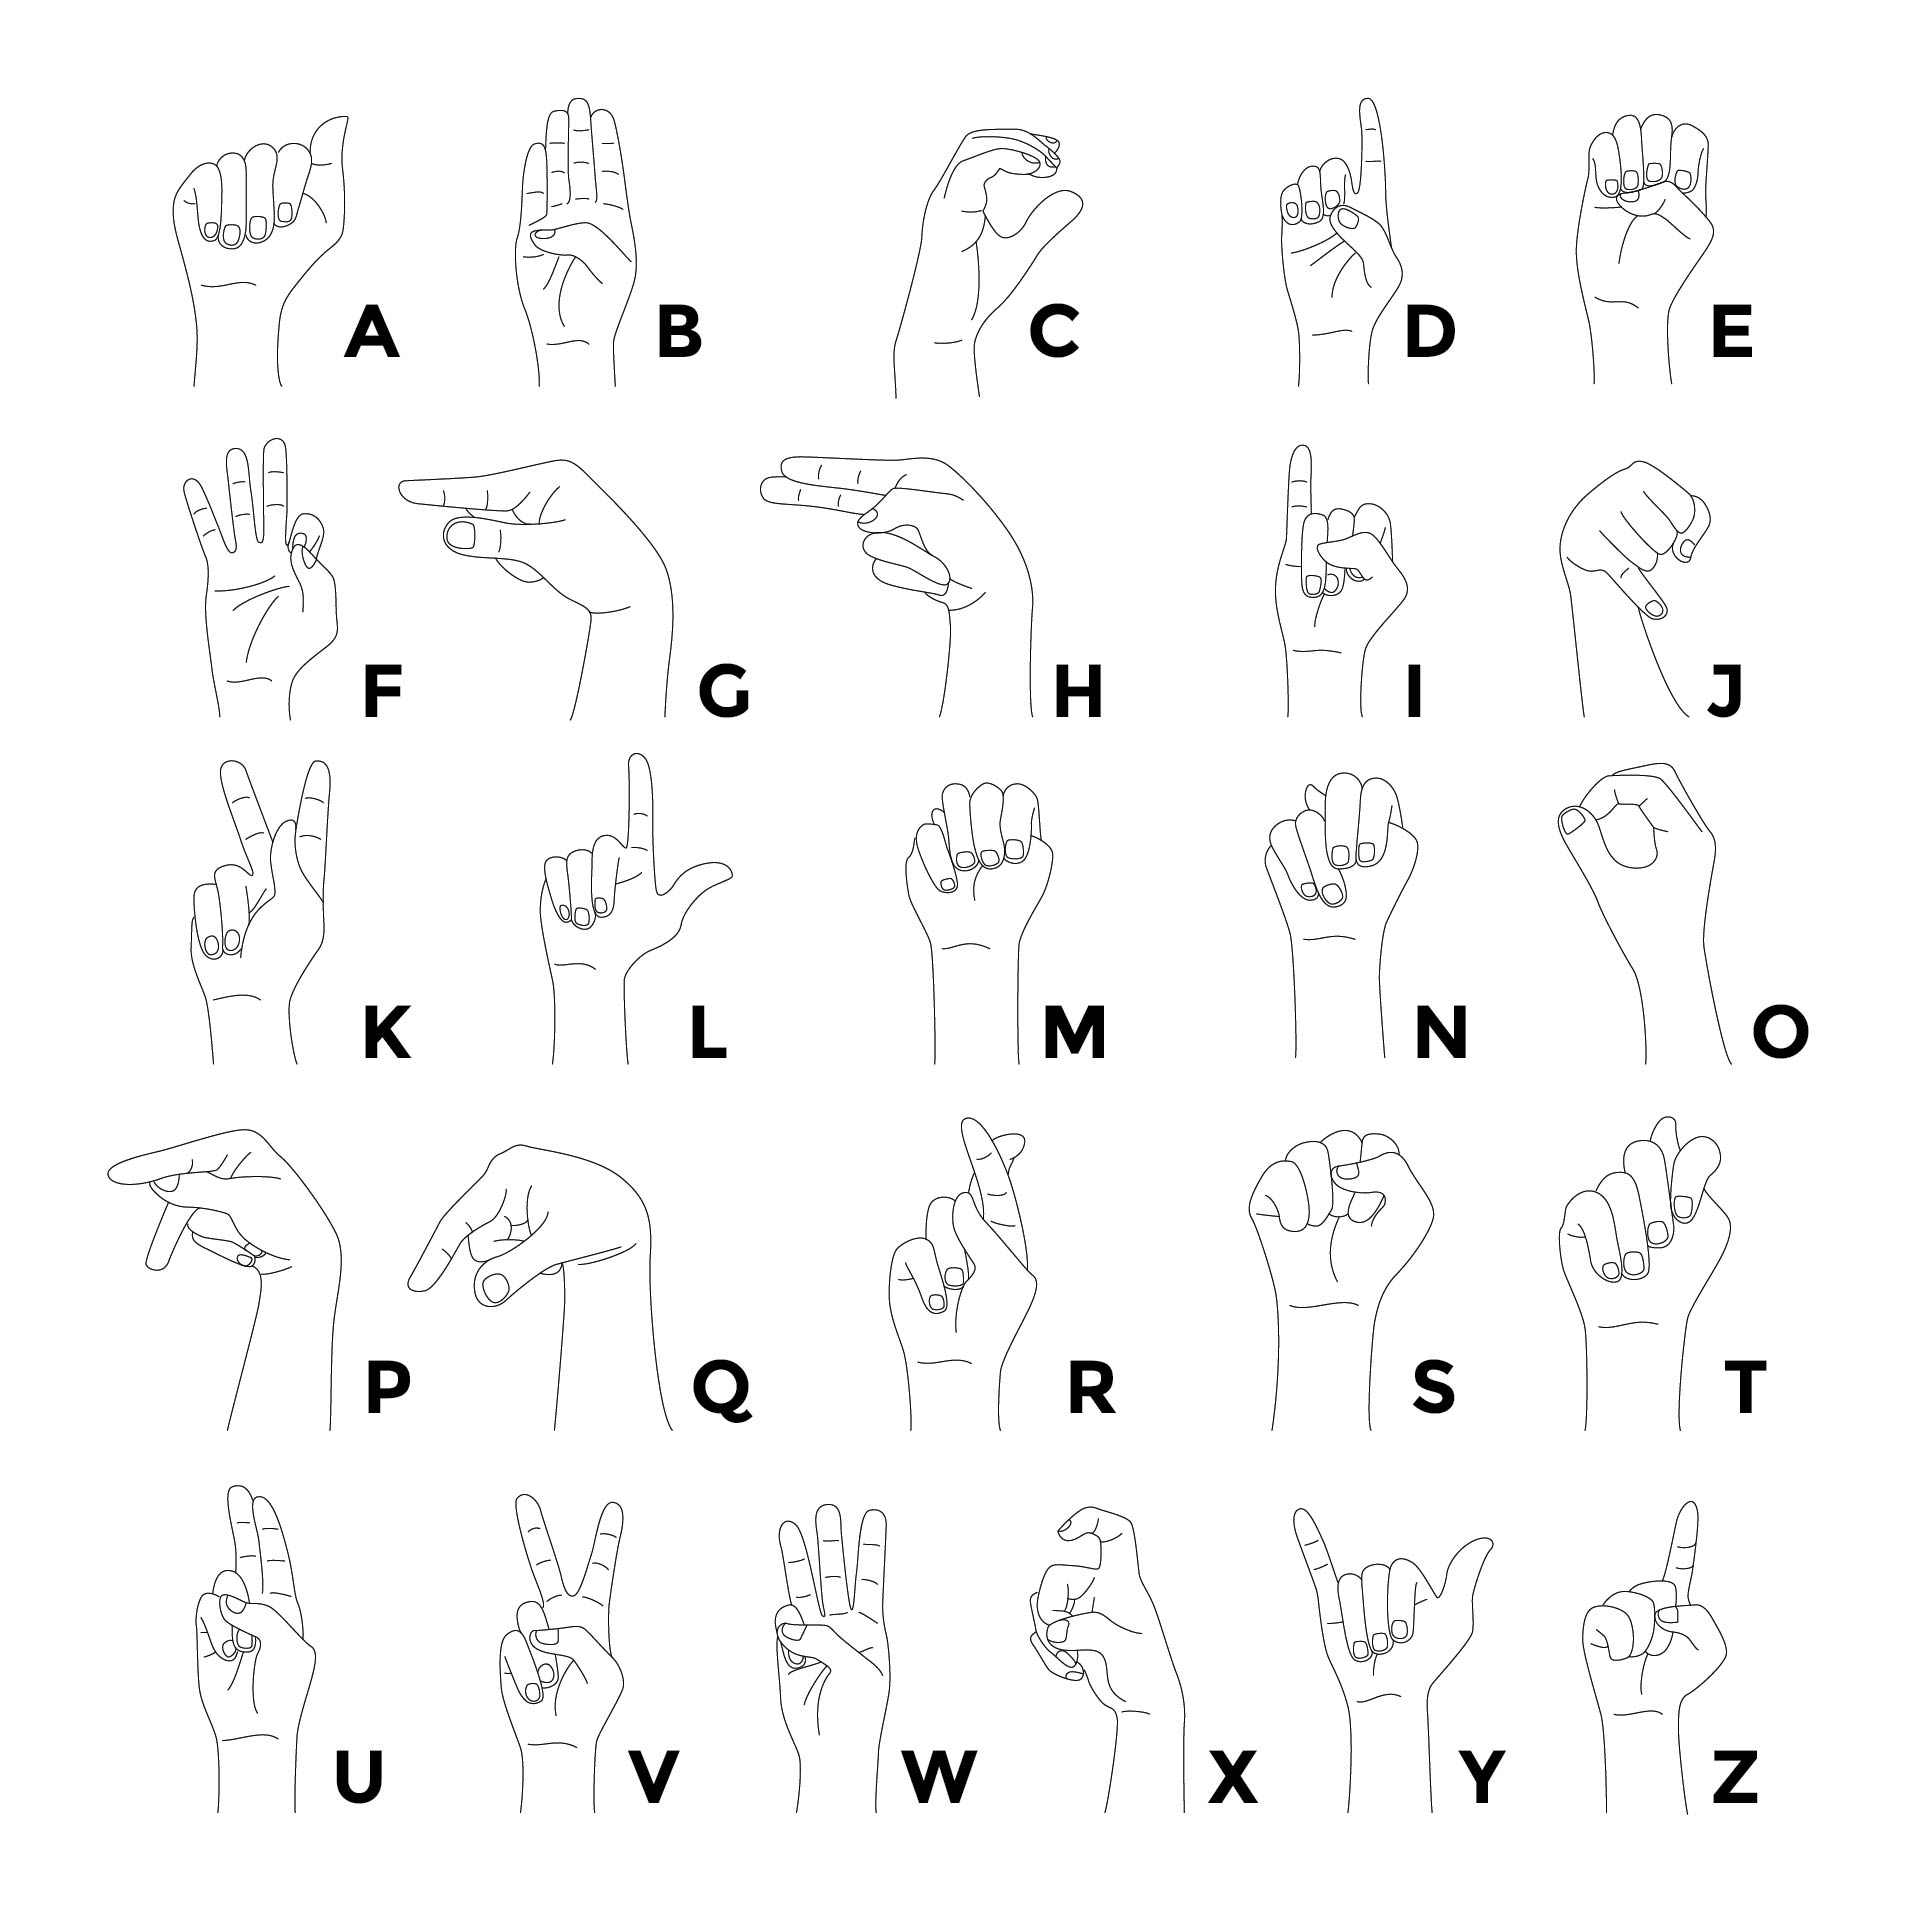 5-best-images-of-sign-language-numbers-1-100-chart-printables